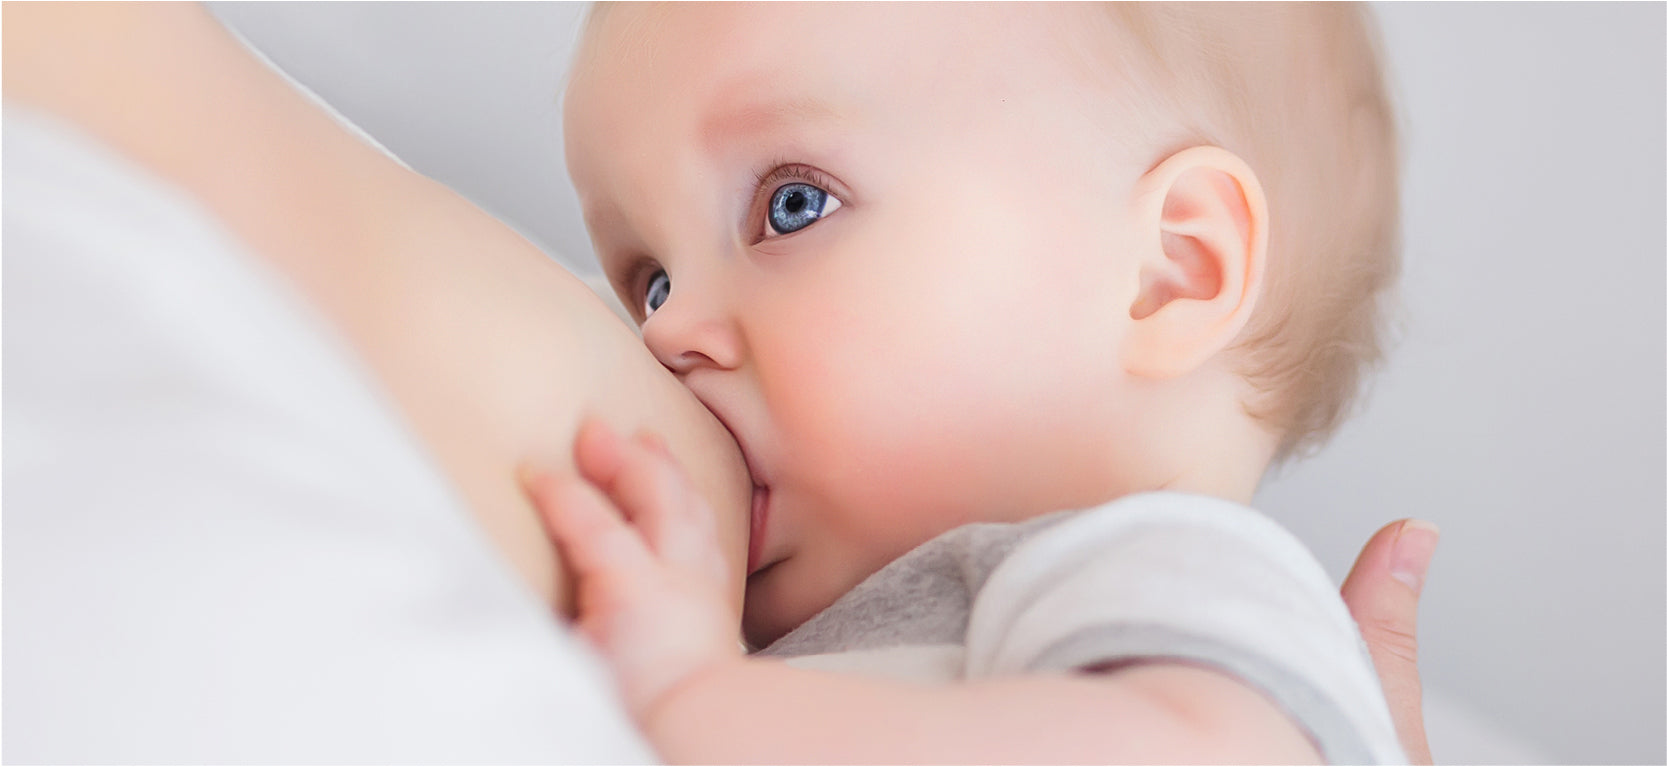 8 Tips for Successful Breastfeeding